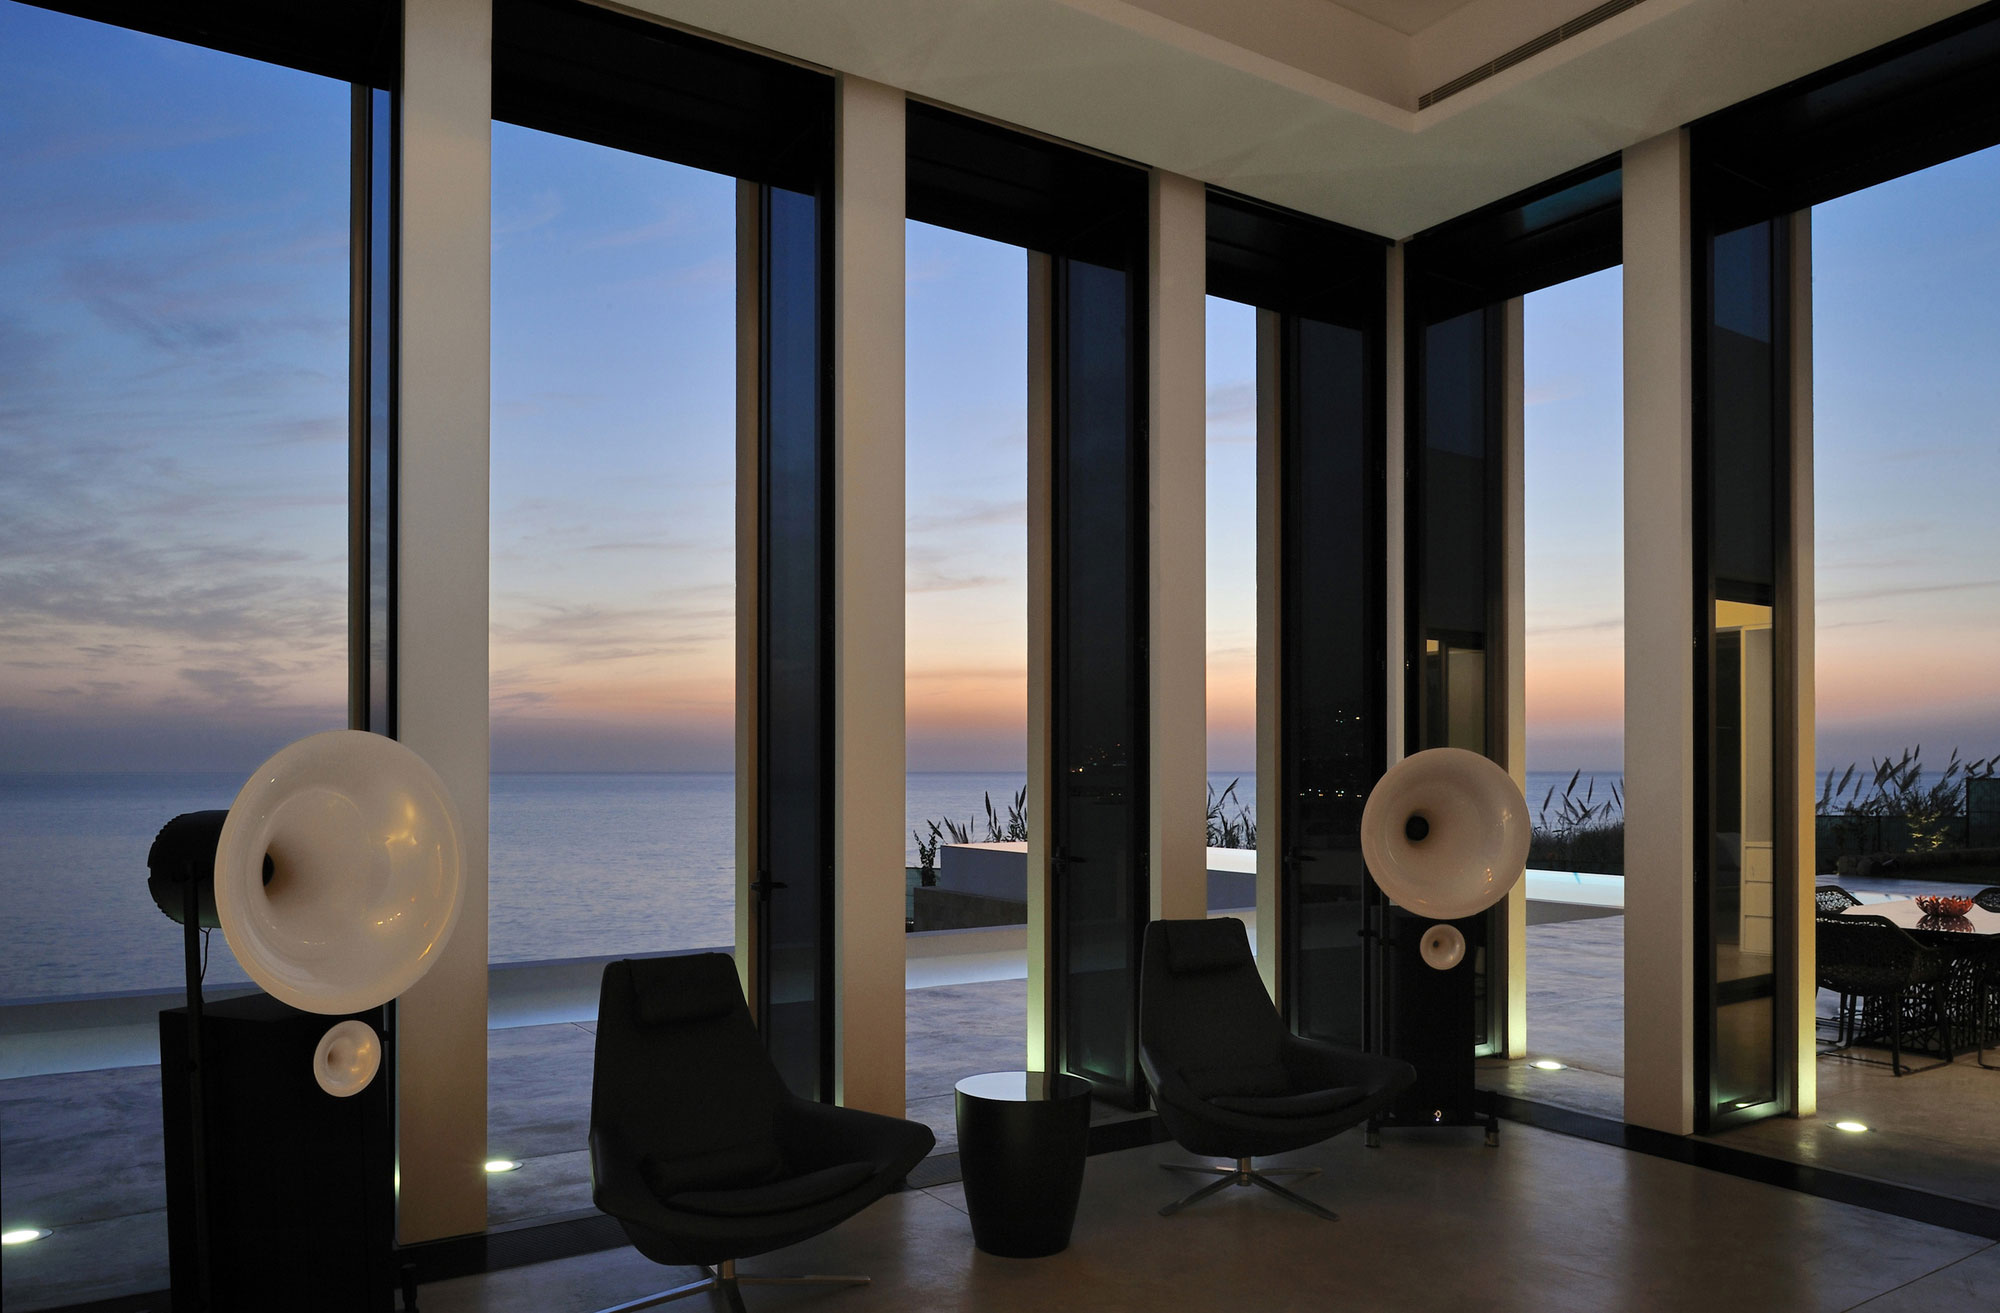 Beach And Sparkling Attractive Beach And Sunset View Sparkling Outdoor Lights Transparent Glass Wall Dark Glove Chairs Sleek Dark Stool Fidar Beach House Dream Homes Futuristic Modern Beach House With Neutral Color Palettes For A Family Of Five